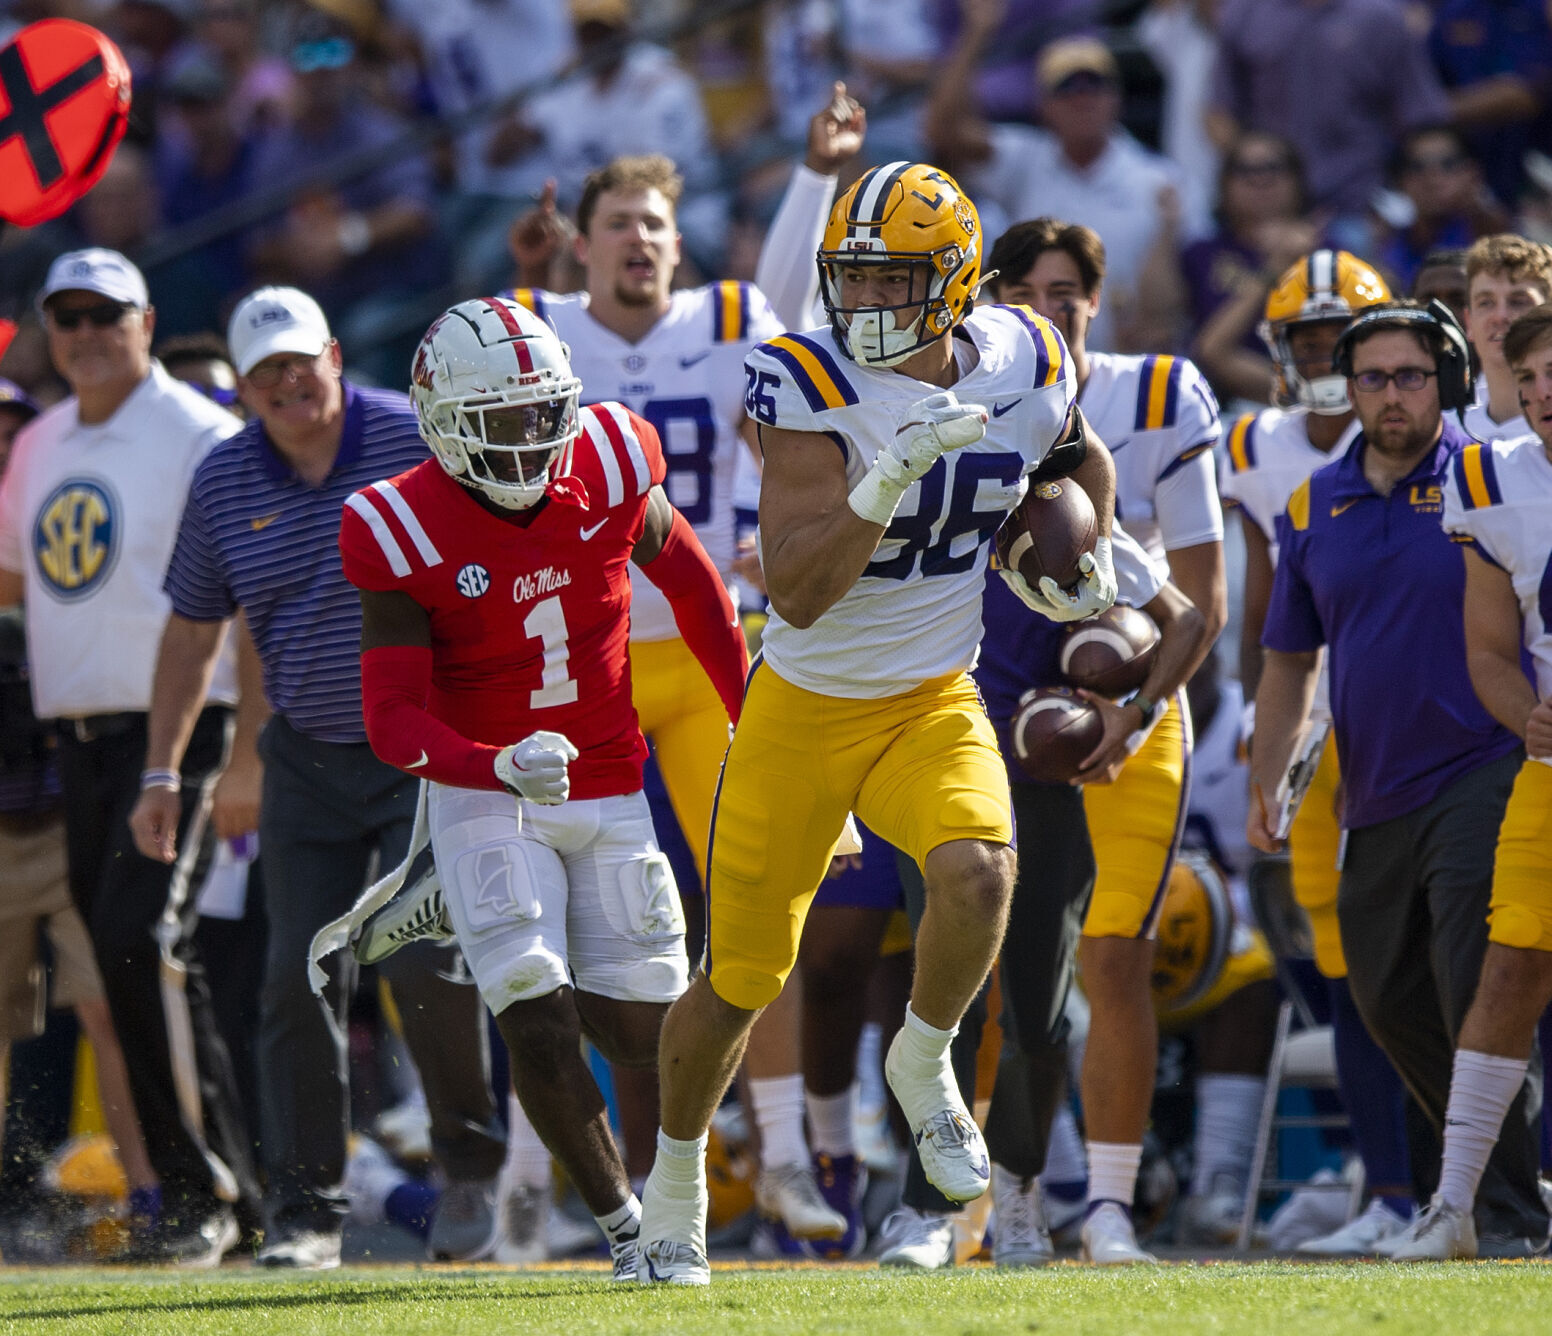 Week 5 college football predictions, tips: Picking LSU-Ole Miss and other key matchups